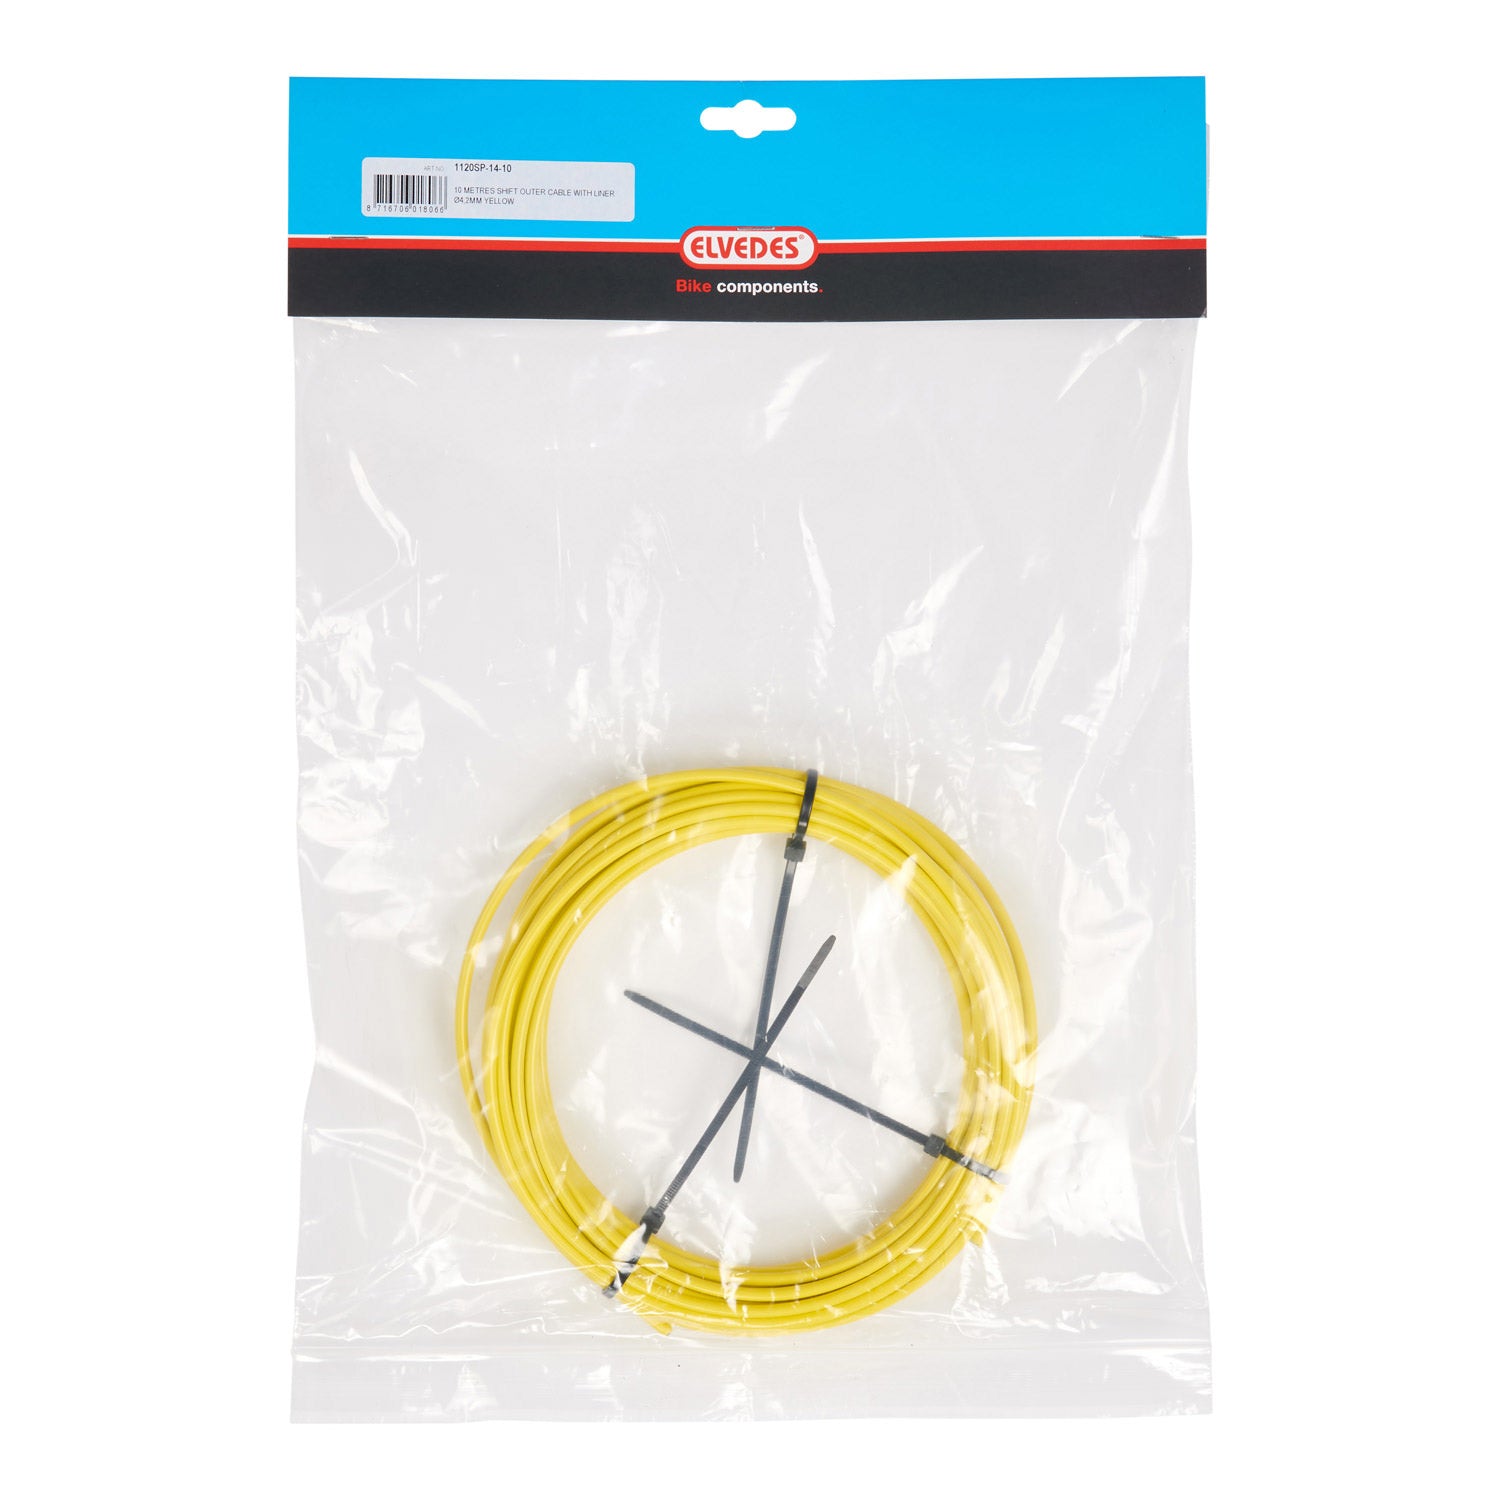 Elvedes gear outer cable ø4.2mm yellow 10mtr.